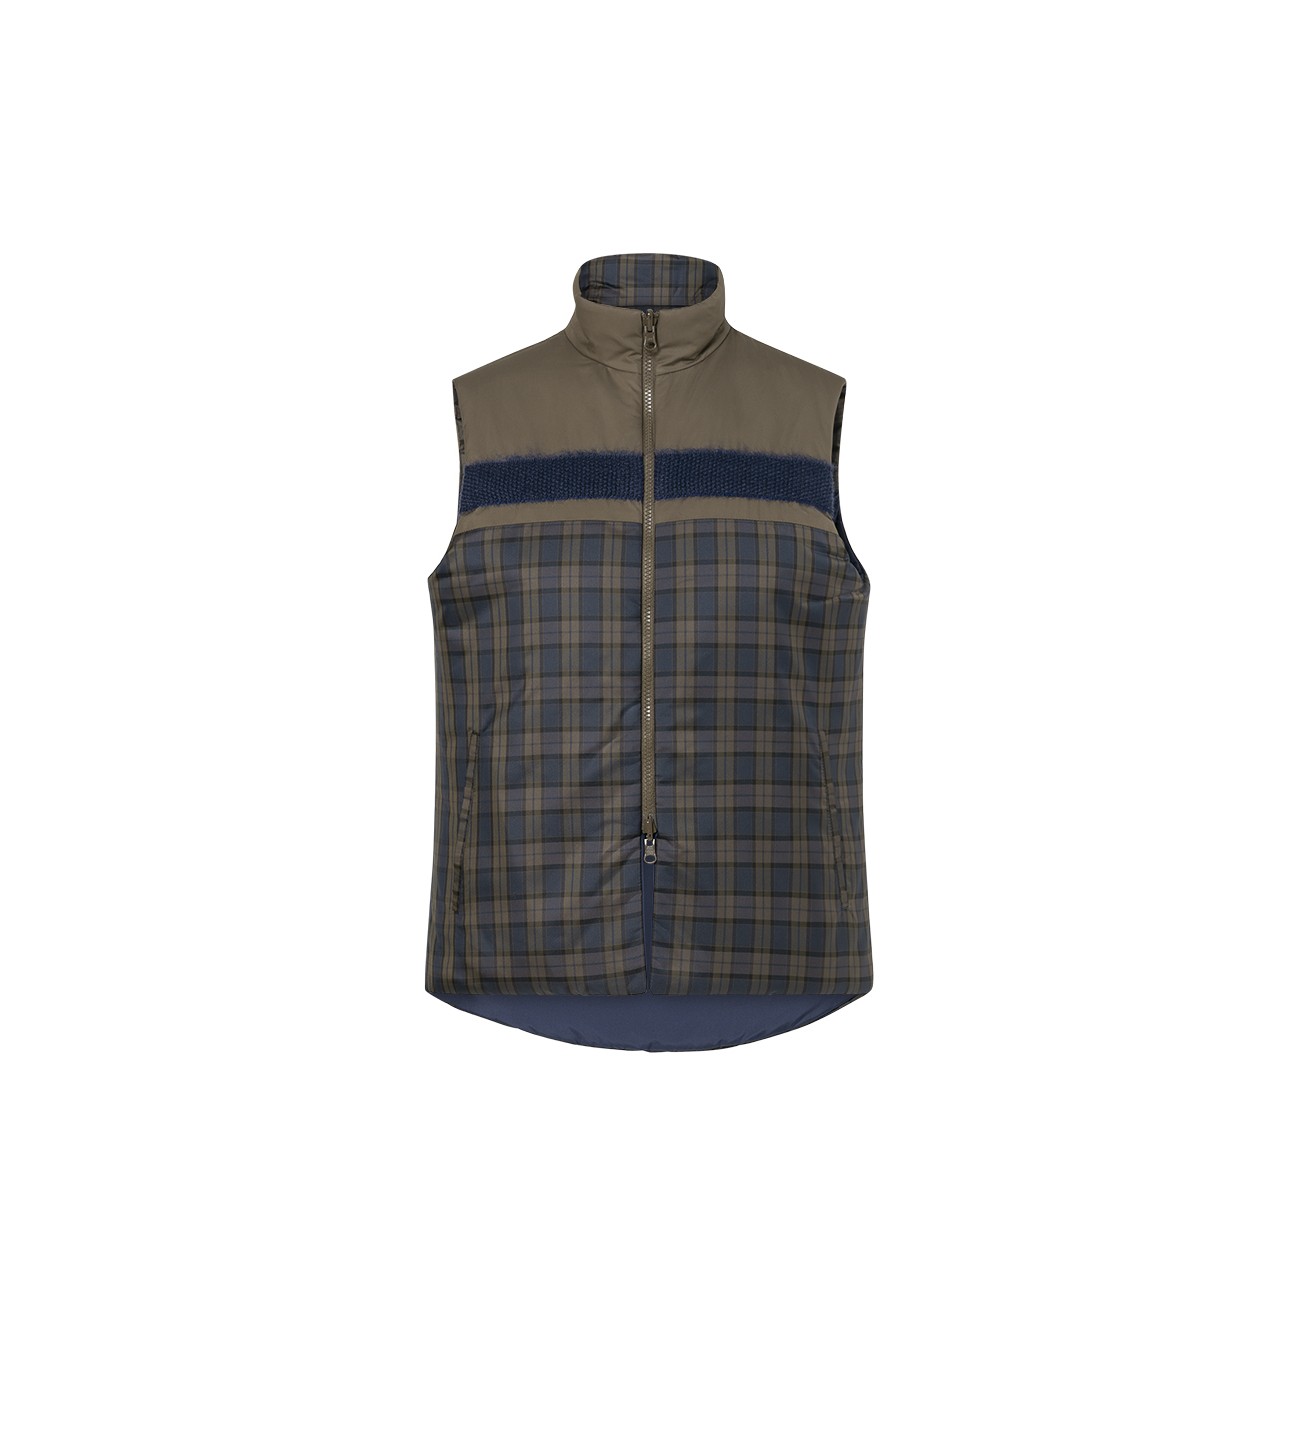 MARIONA_REVERSIBLE_QUILTED_VEST_MARIONA_FASHION_CLOTHING_WOMAN_SHOP_ONLINE_5192